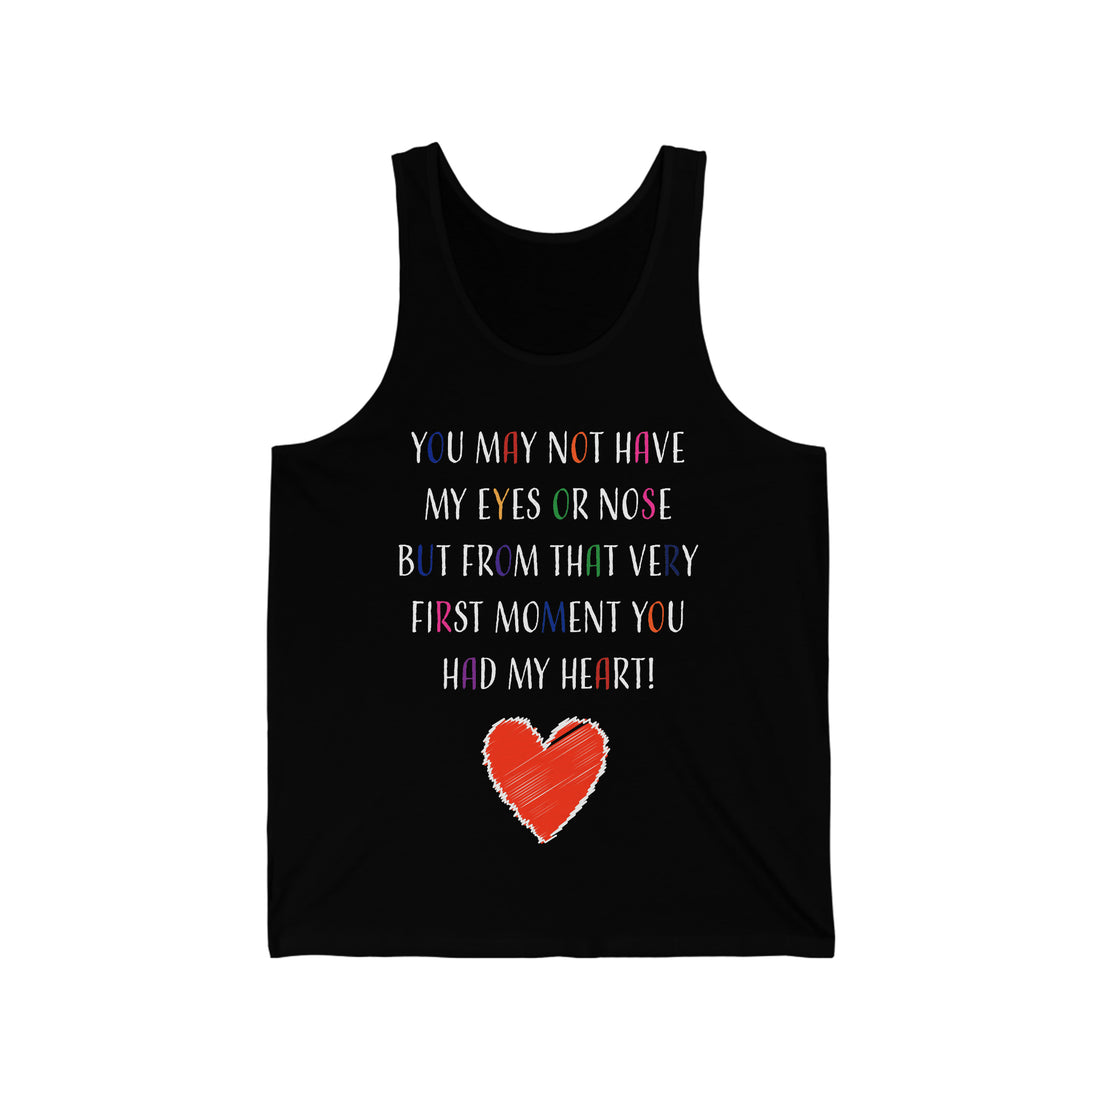 You May Not Have My Eyes Or Nose But From That Very First Moment You Had My HEART - Unisex Jersey Tank Top